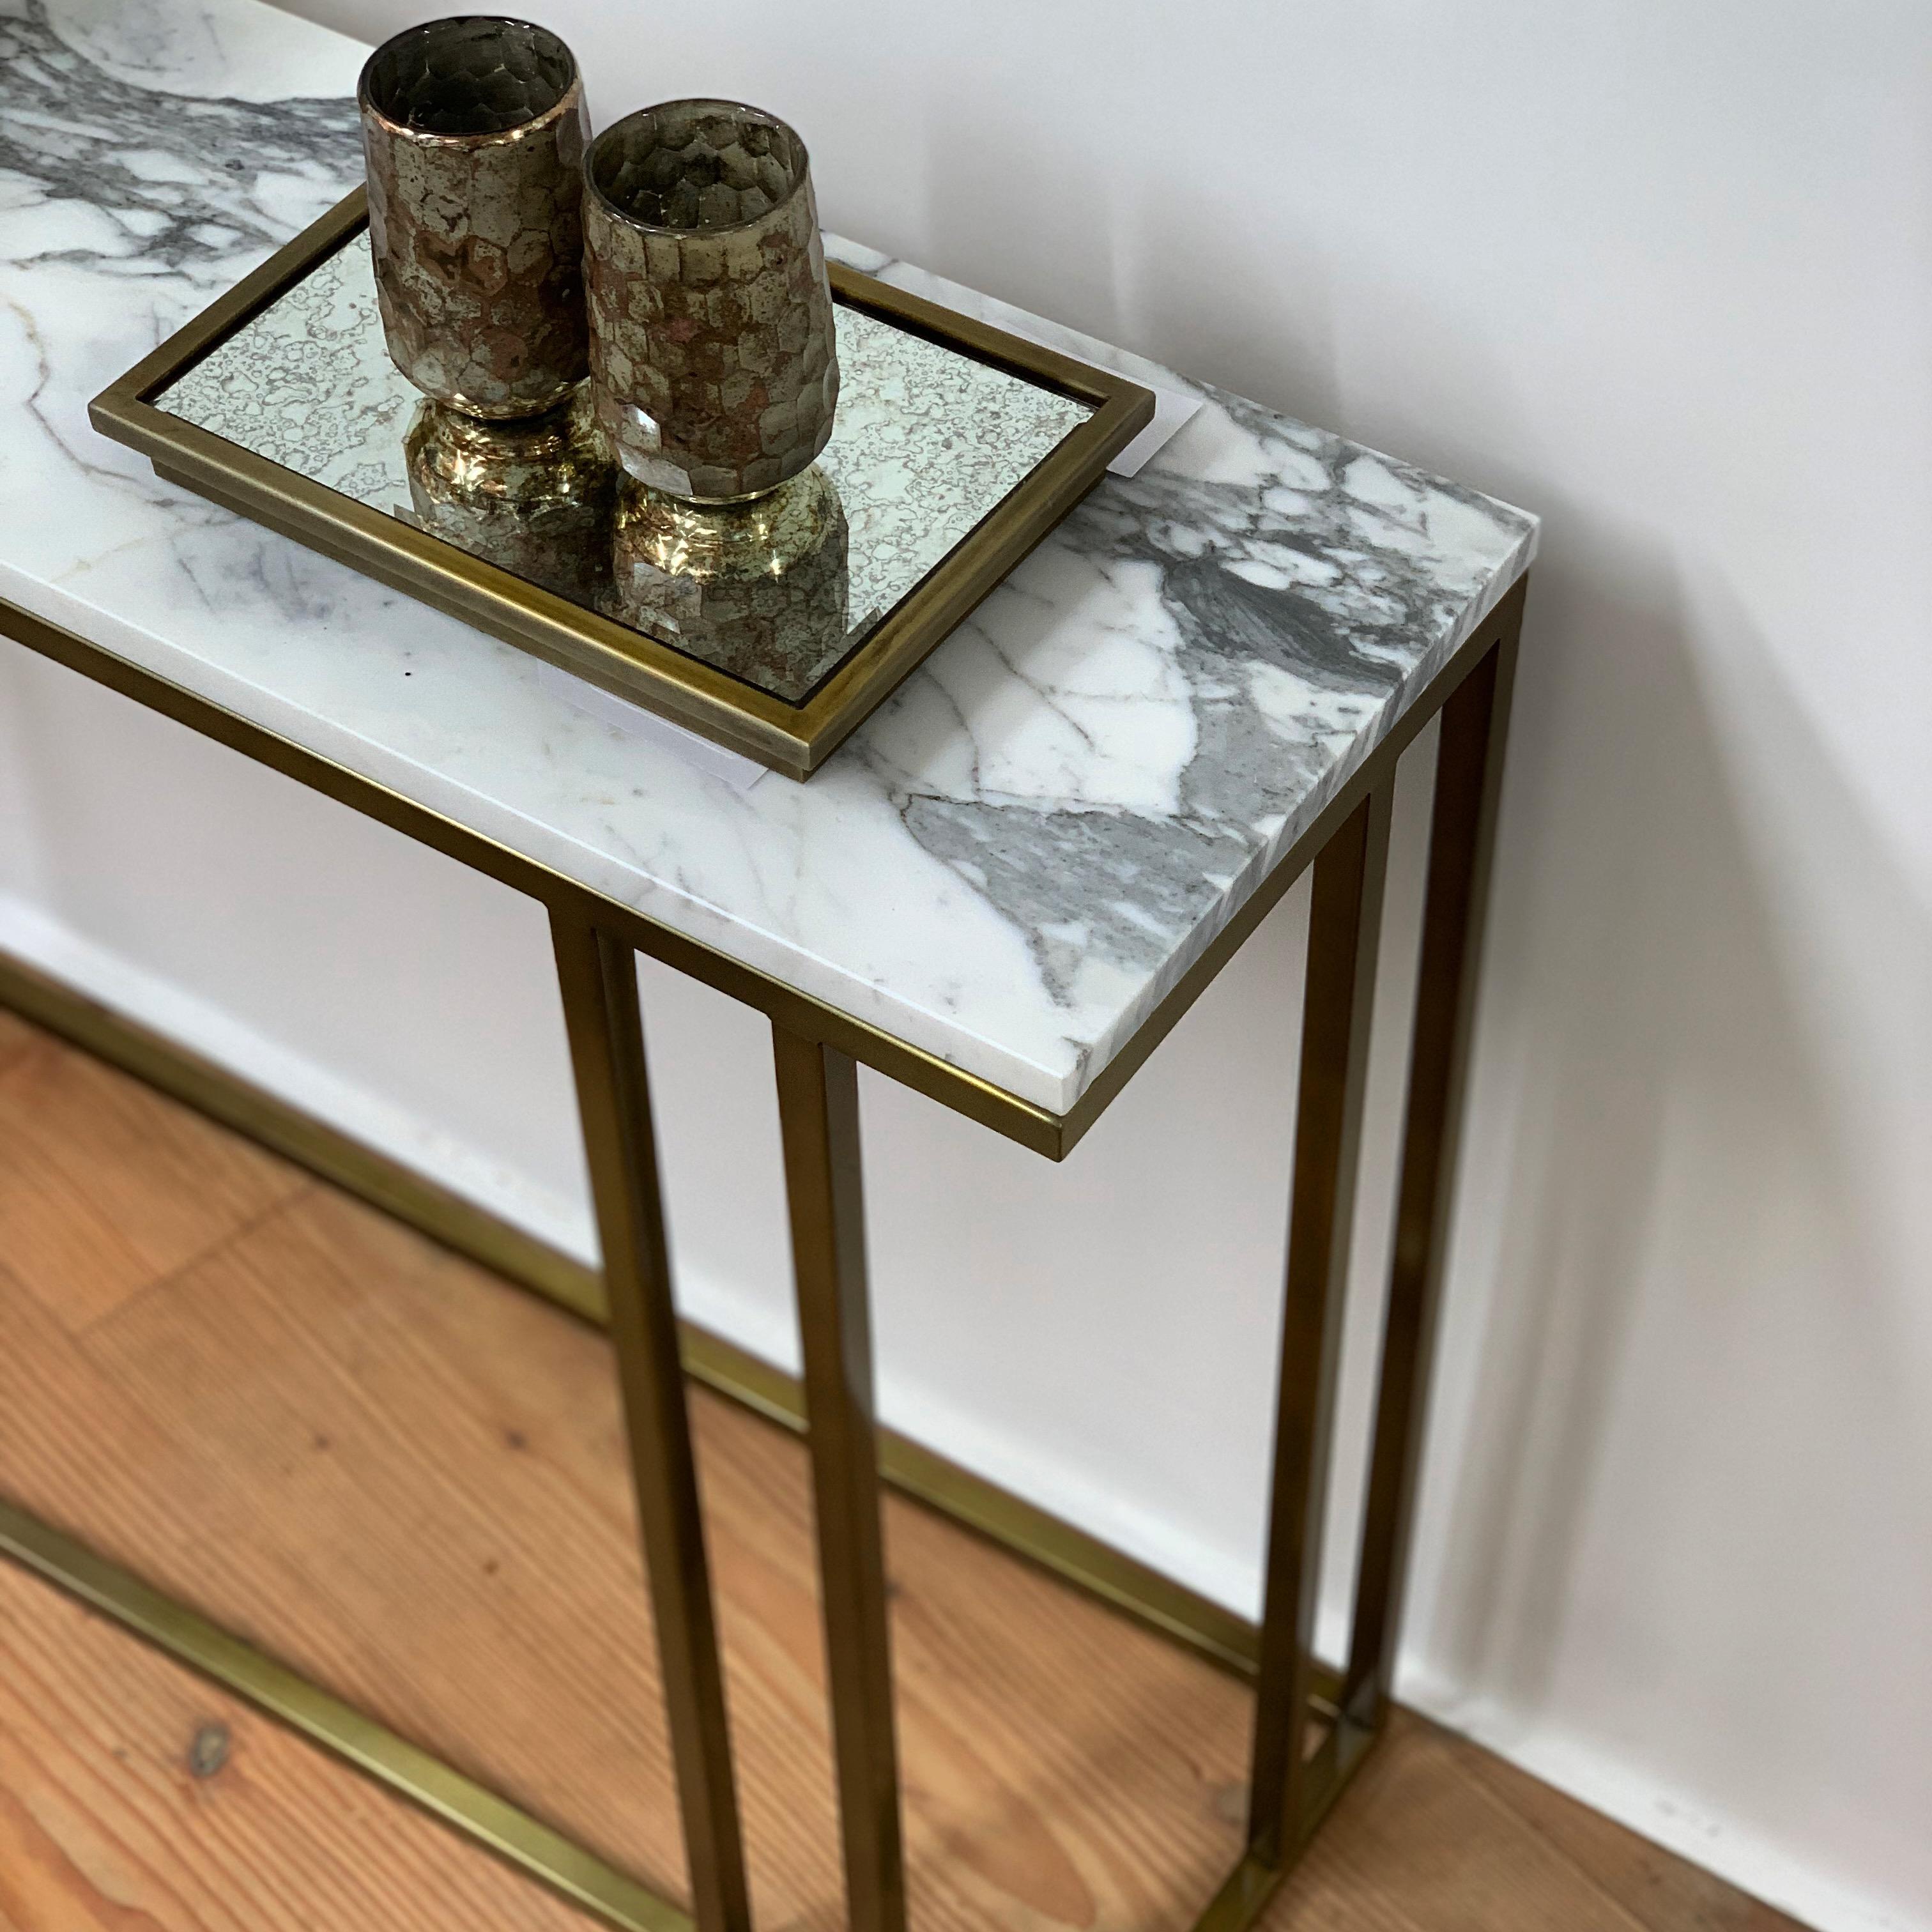 Patinated Art Deco Inspired Elio Console in Antique Brass Tint Structure & Marble Surface For Sale